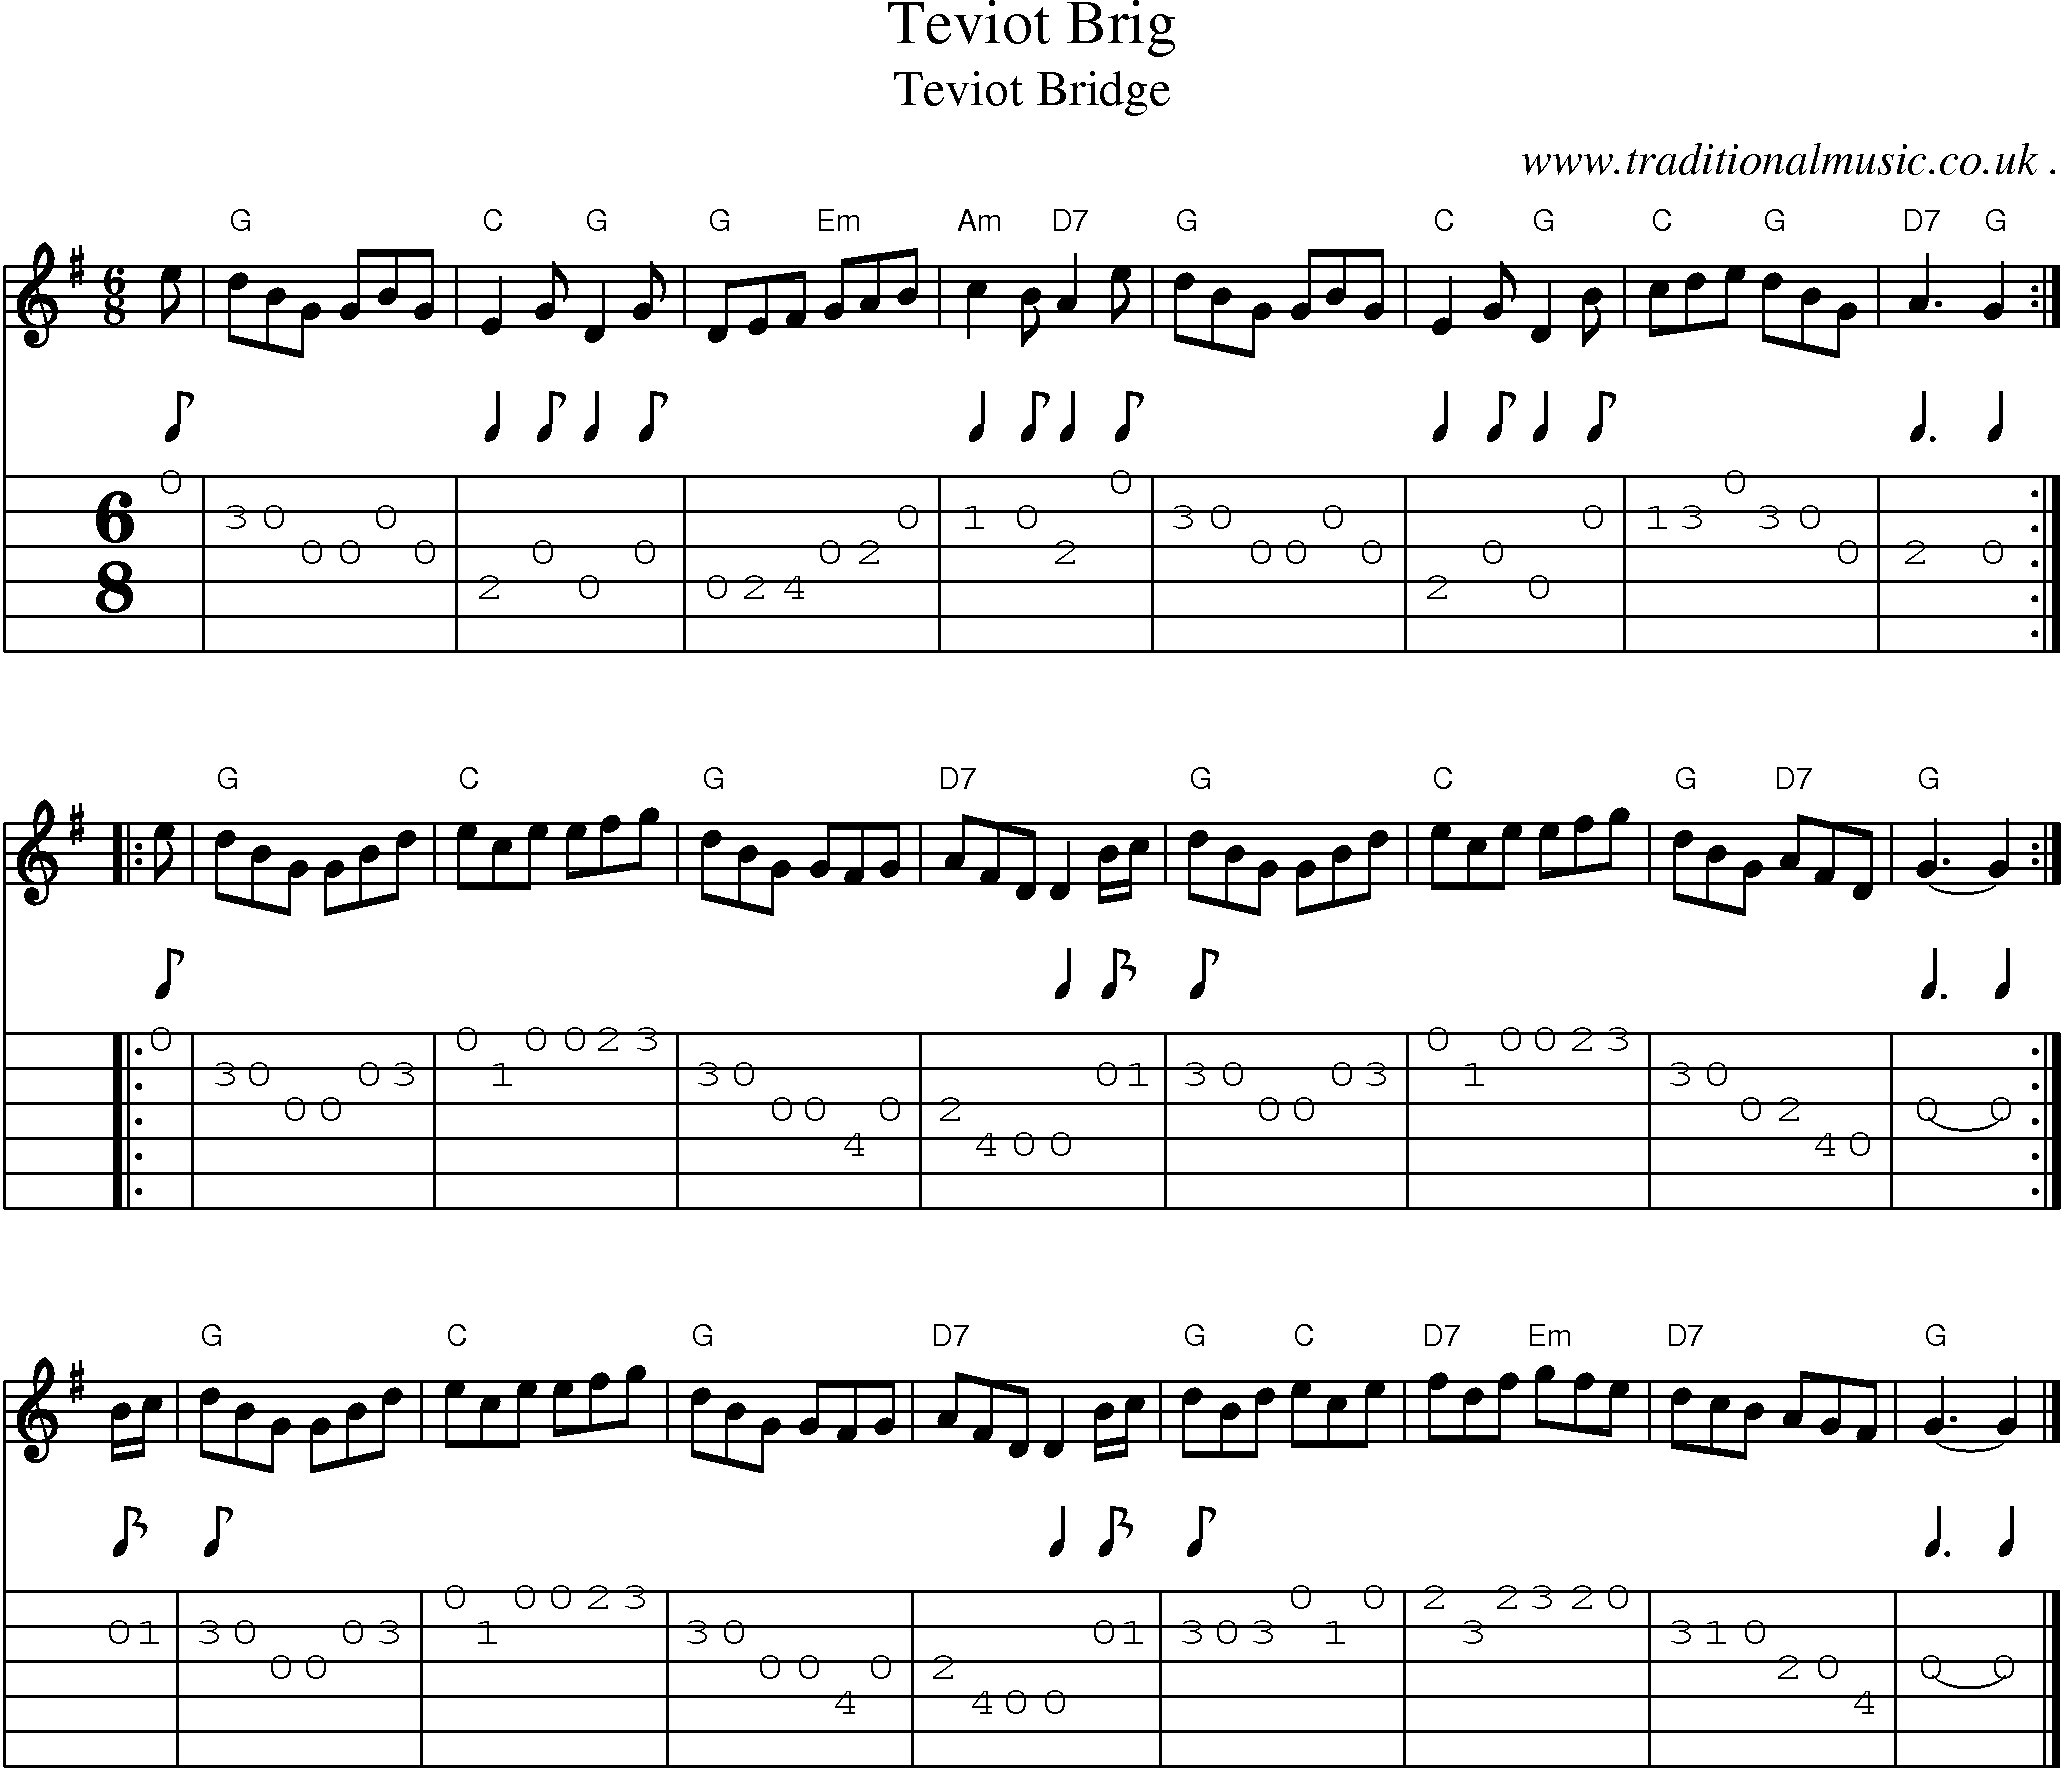 Sheet-music  score, Chords and Guitar Tabs for Teviot Brig